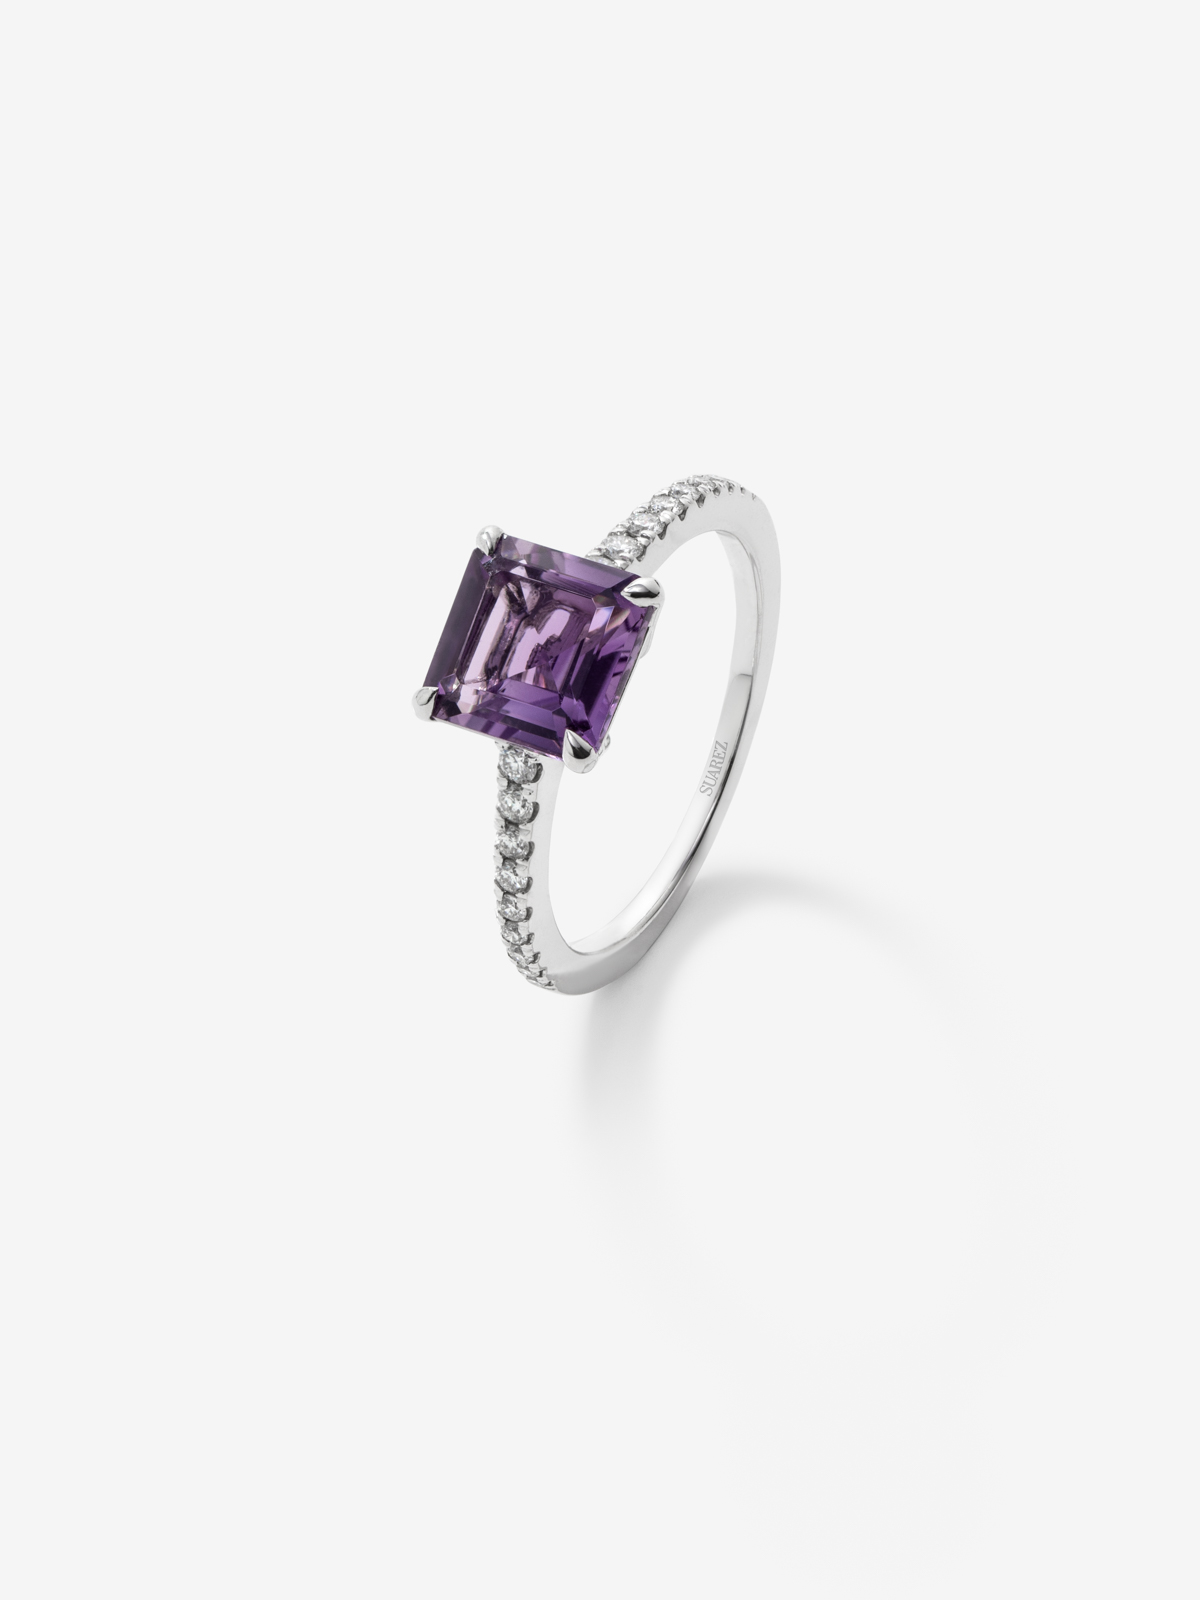 18K yellow gold solitary ring with purple amethyst in radiant size 1.79 cts and 0.18 cts white diamonds